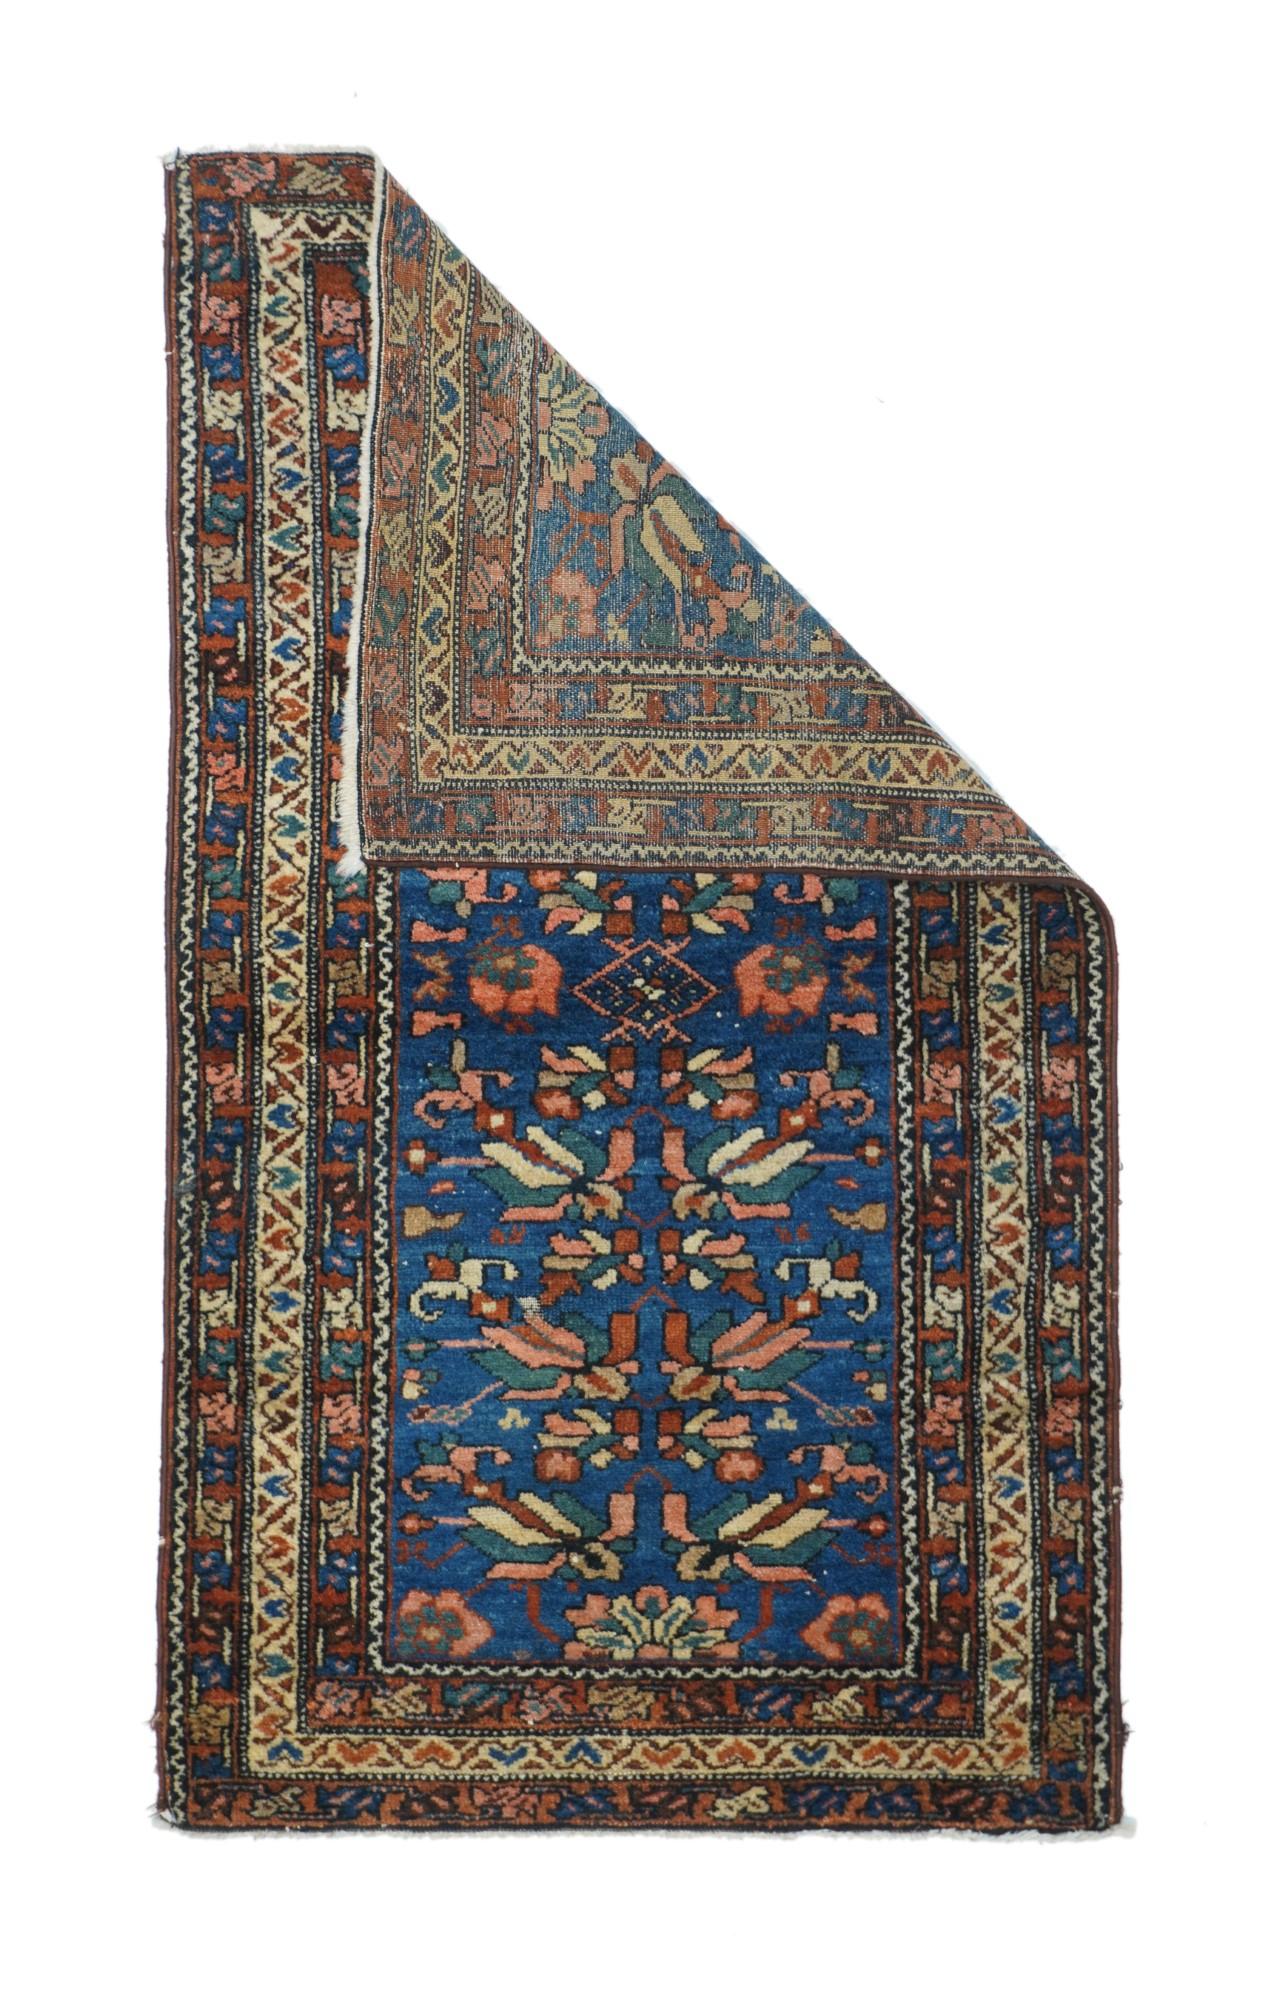 This small west Persian rustic scattershows a middle blue field decorated by floral modules in cream, green and red, facing off around a small central lozenge. Triple narrow borders, with red minors in flip-flop palmette meanders, and a central ecru